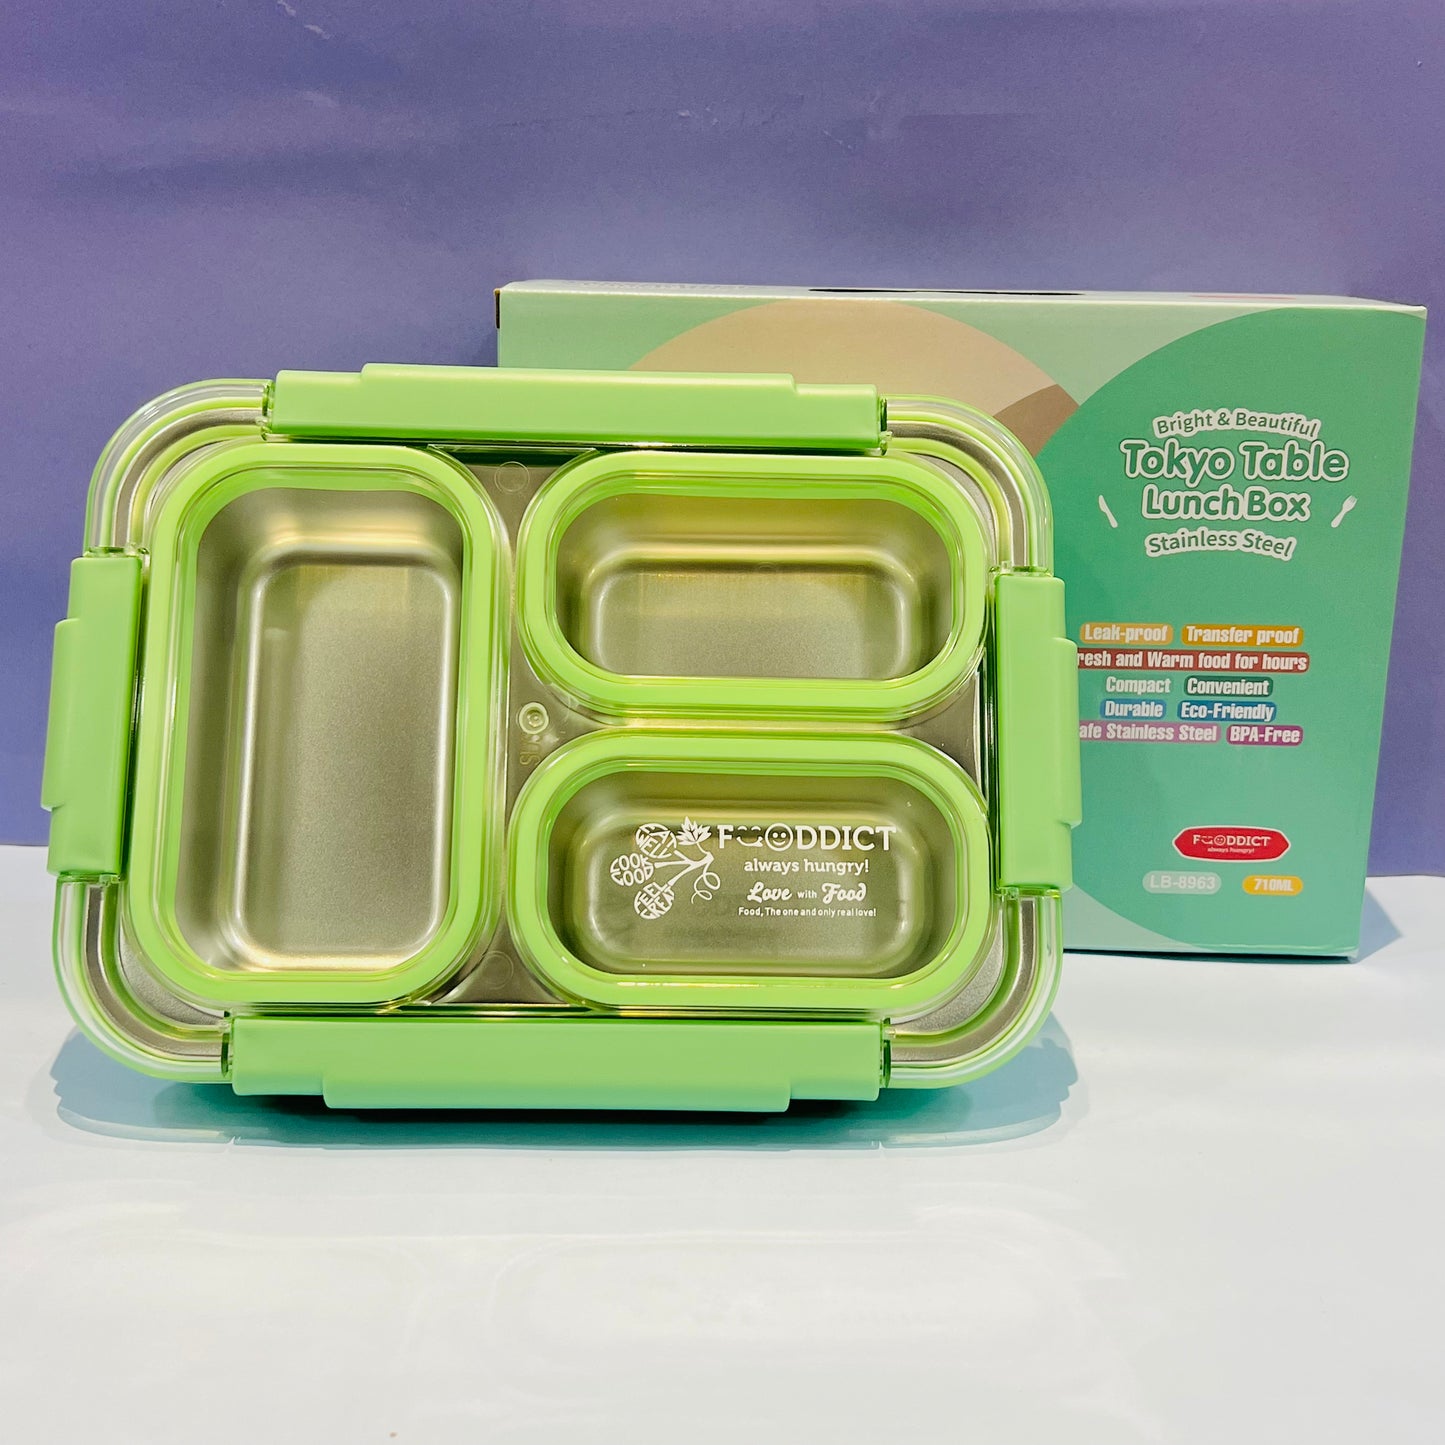 100% Spill Free - 3 Compartments Lunchbox (710ml)